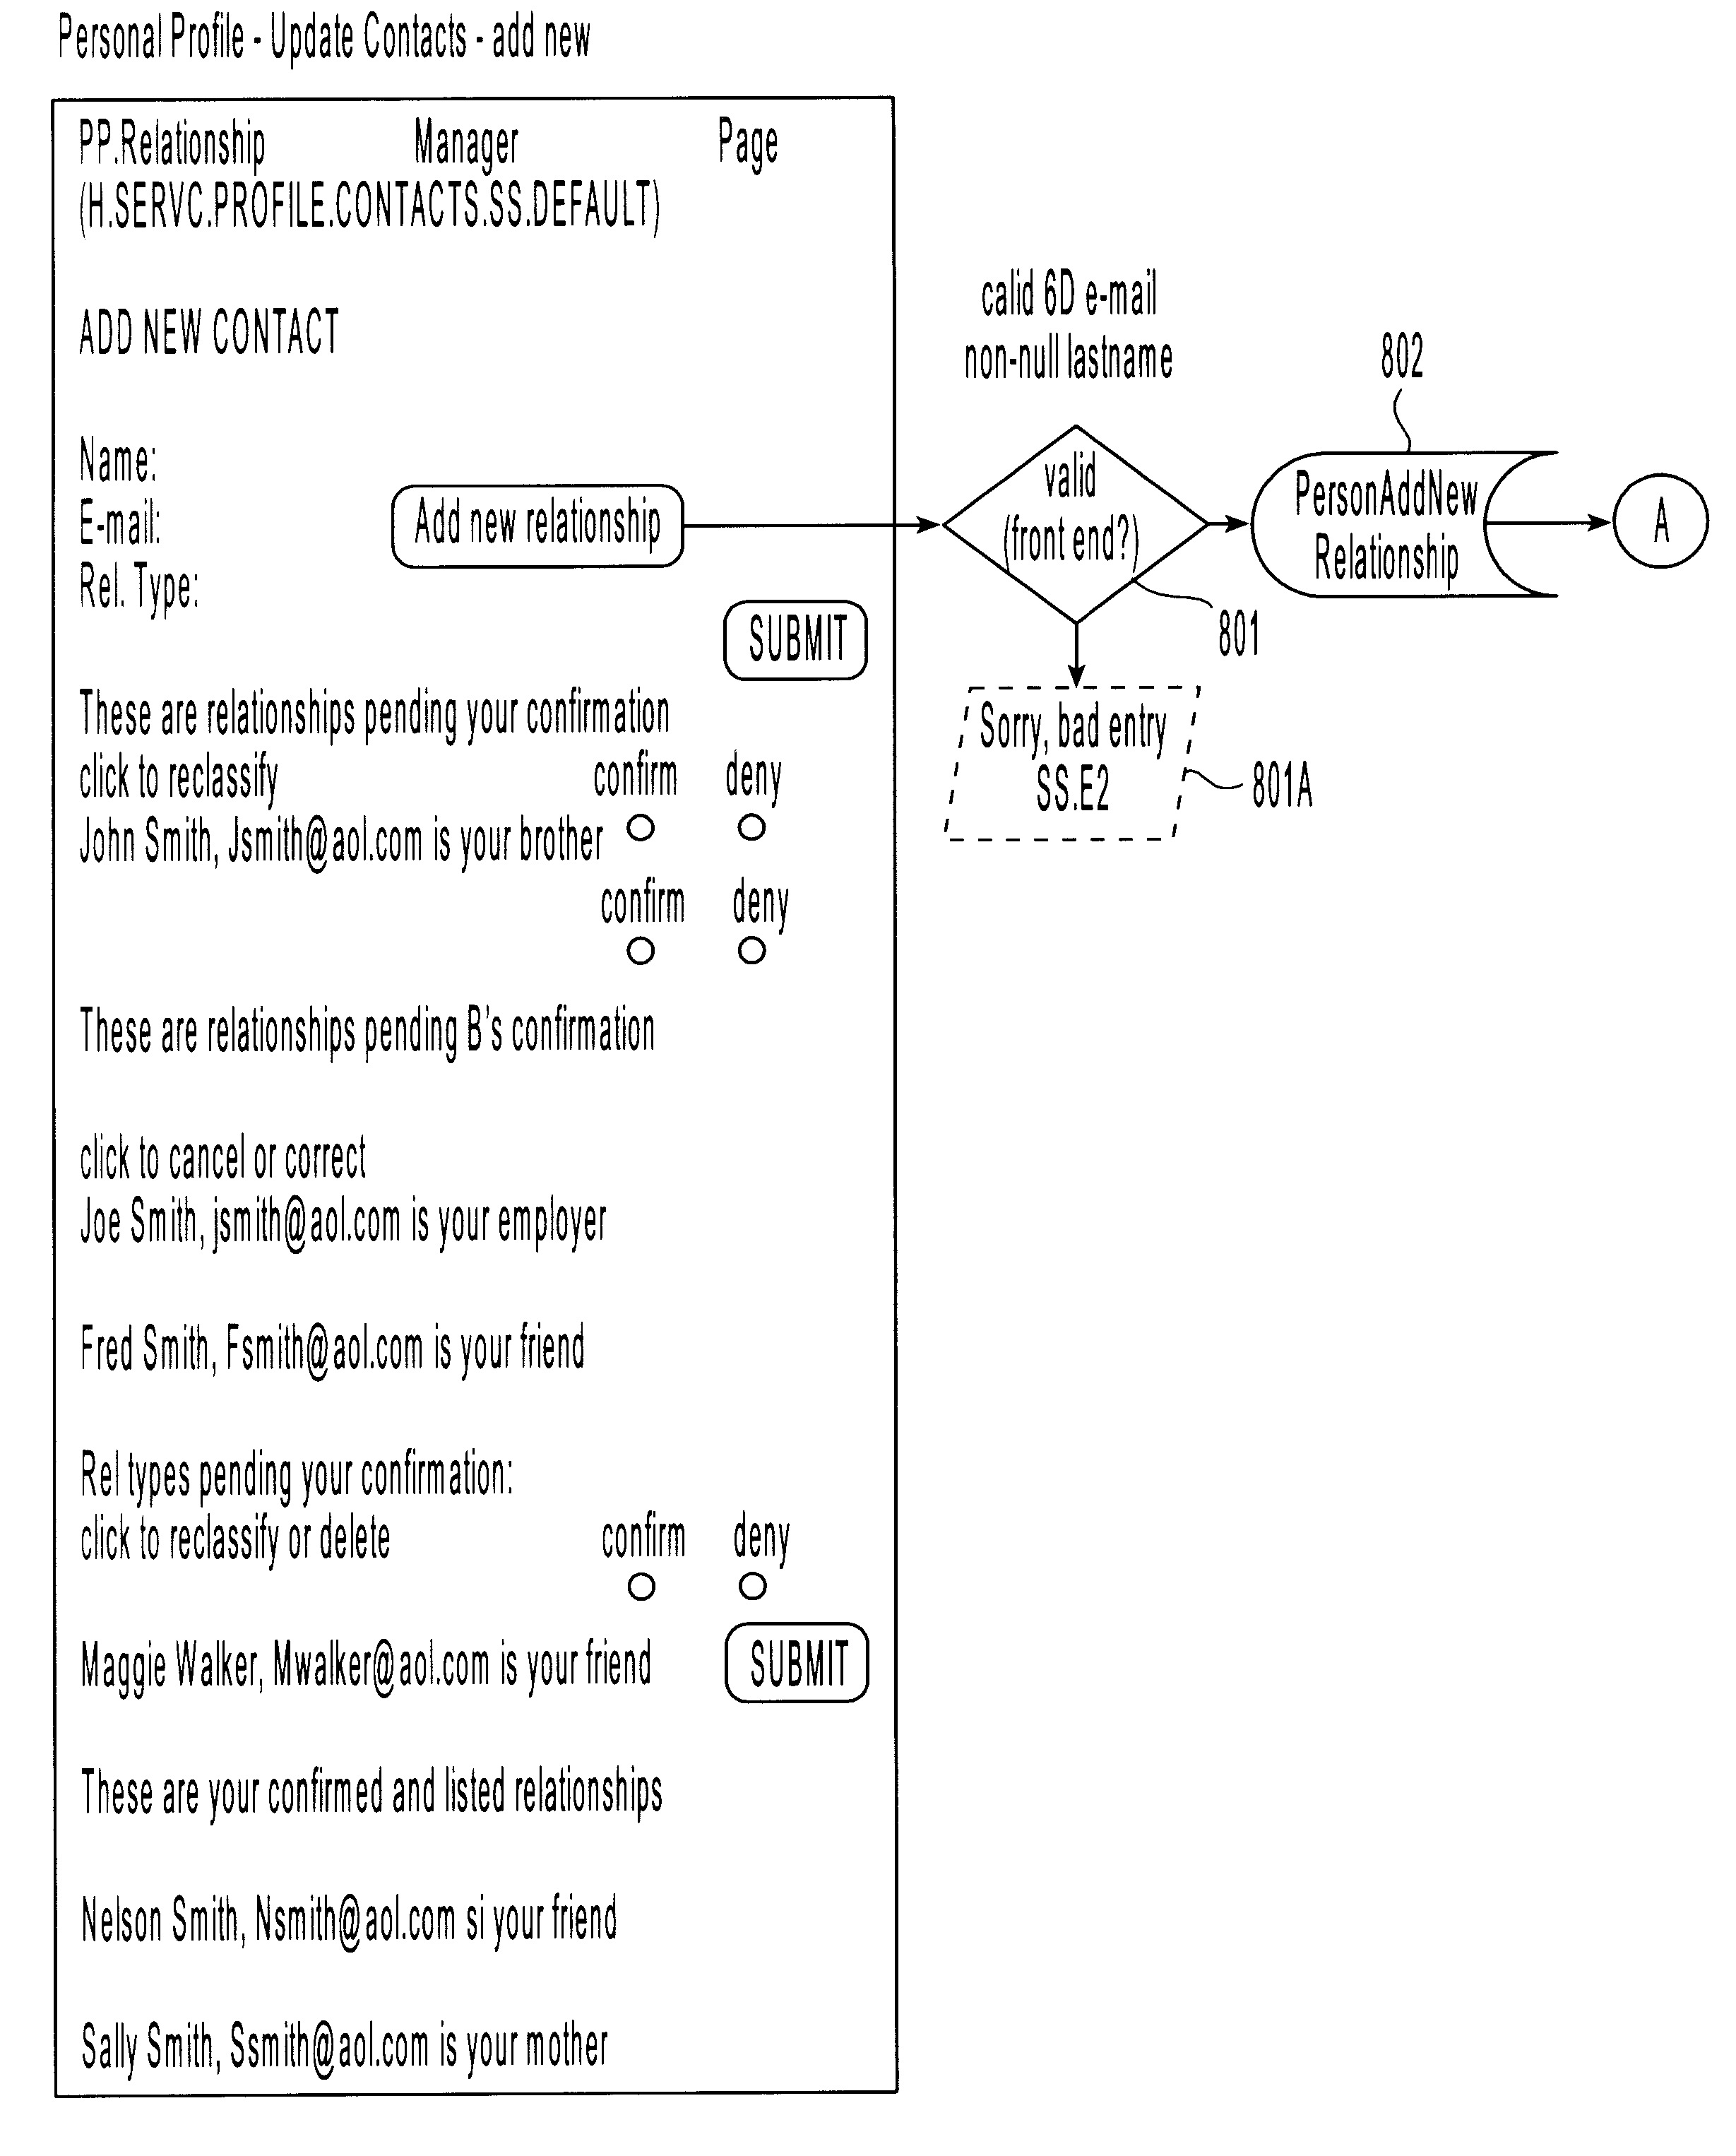 Method and apparatus for constructing a networking database and system